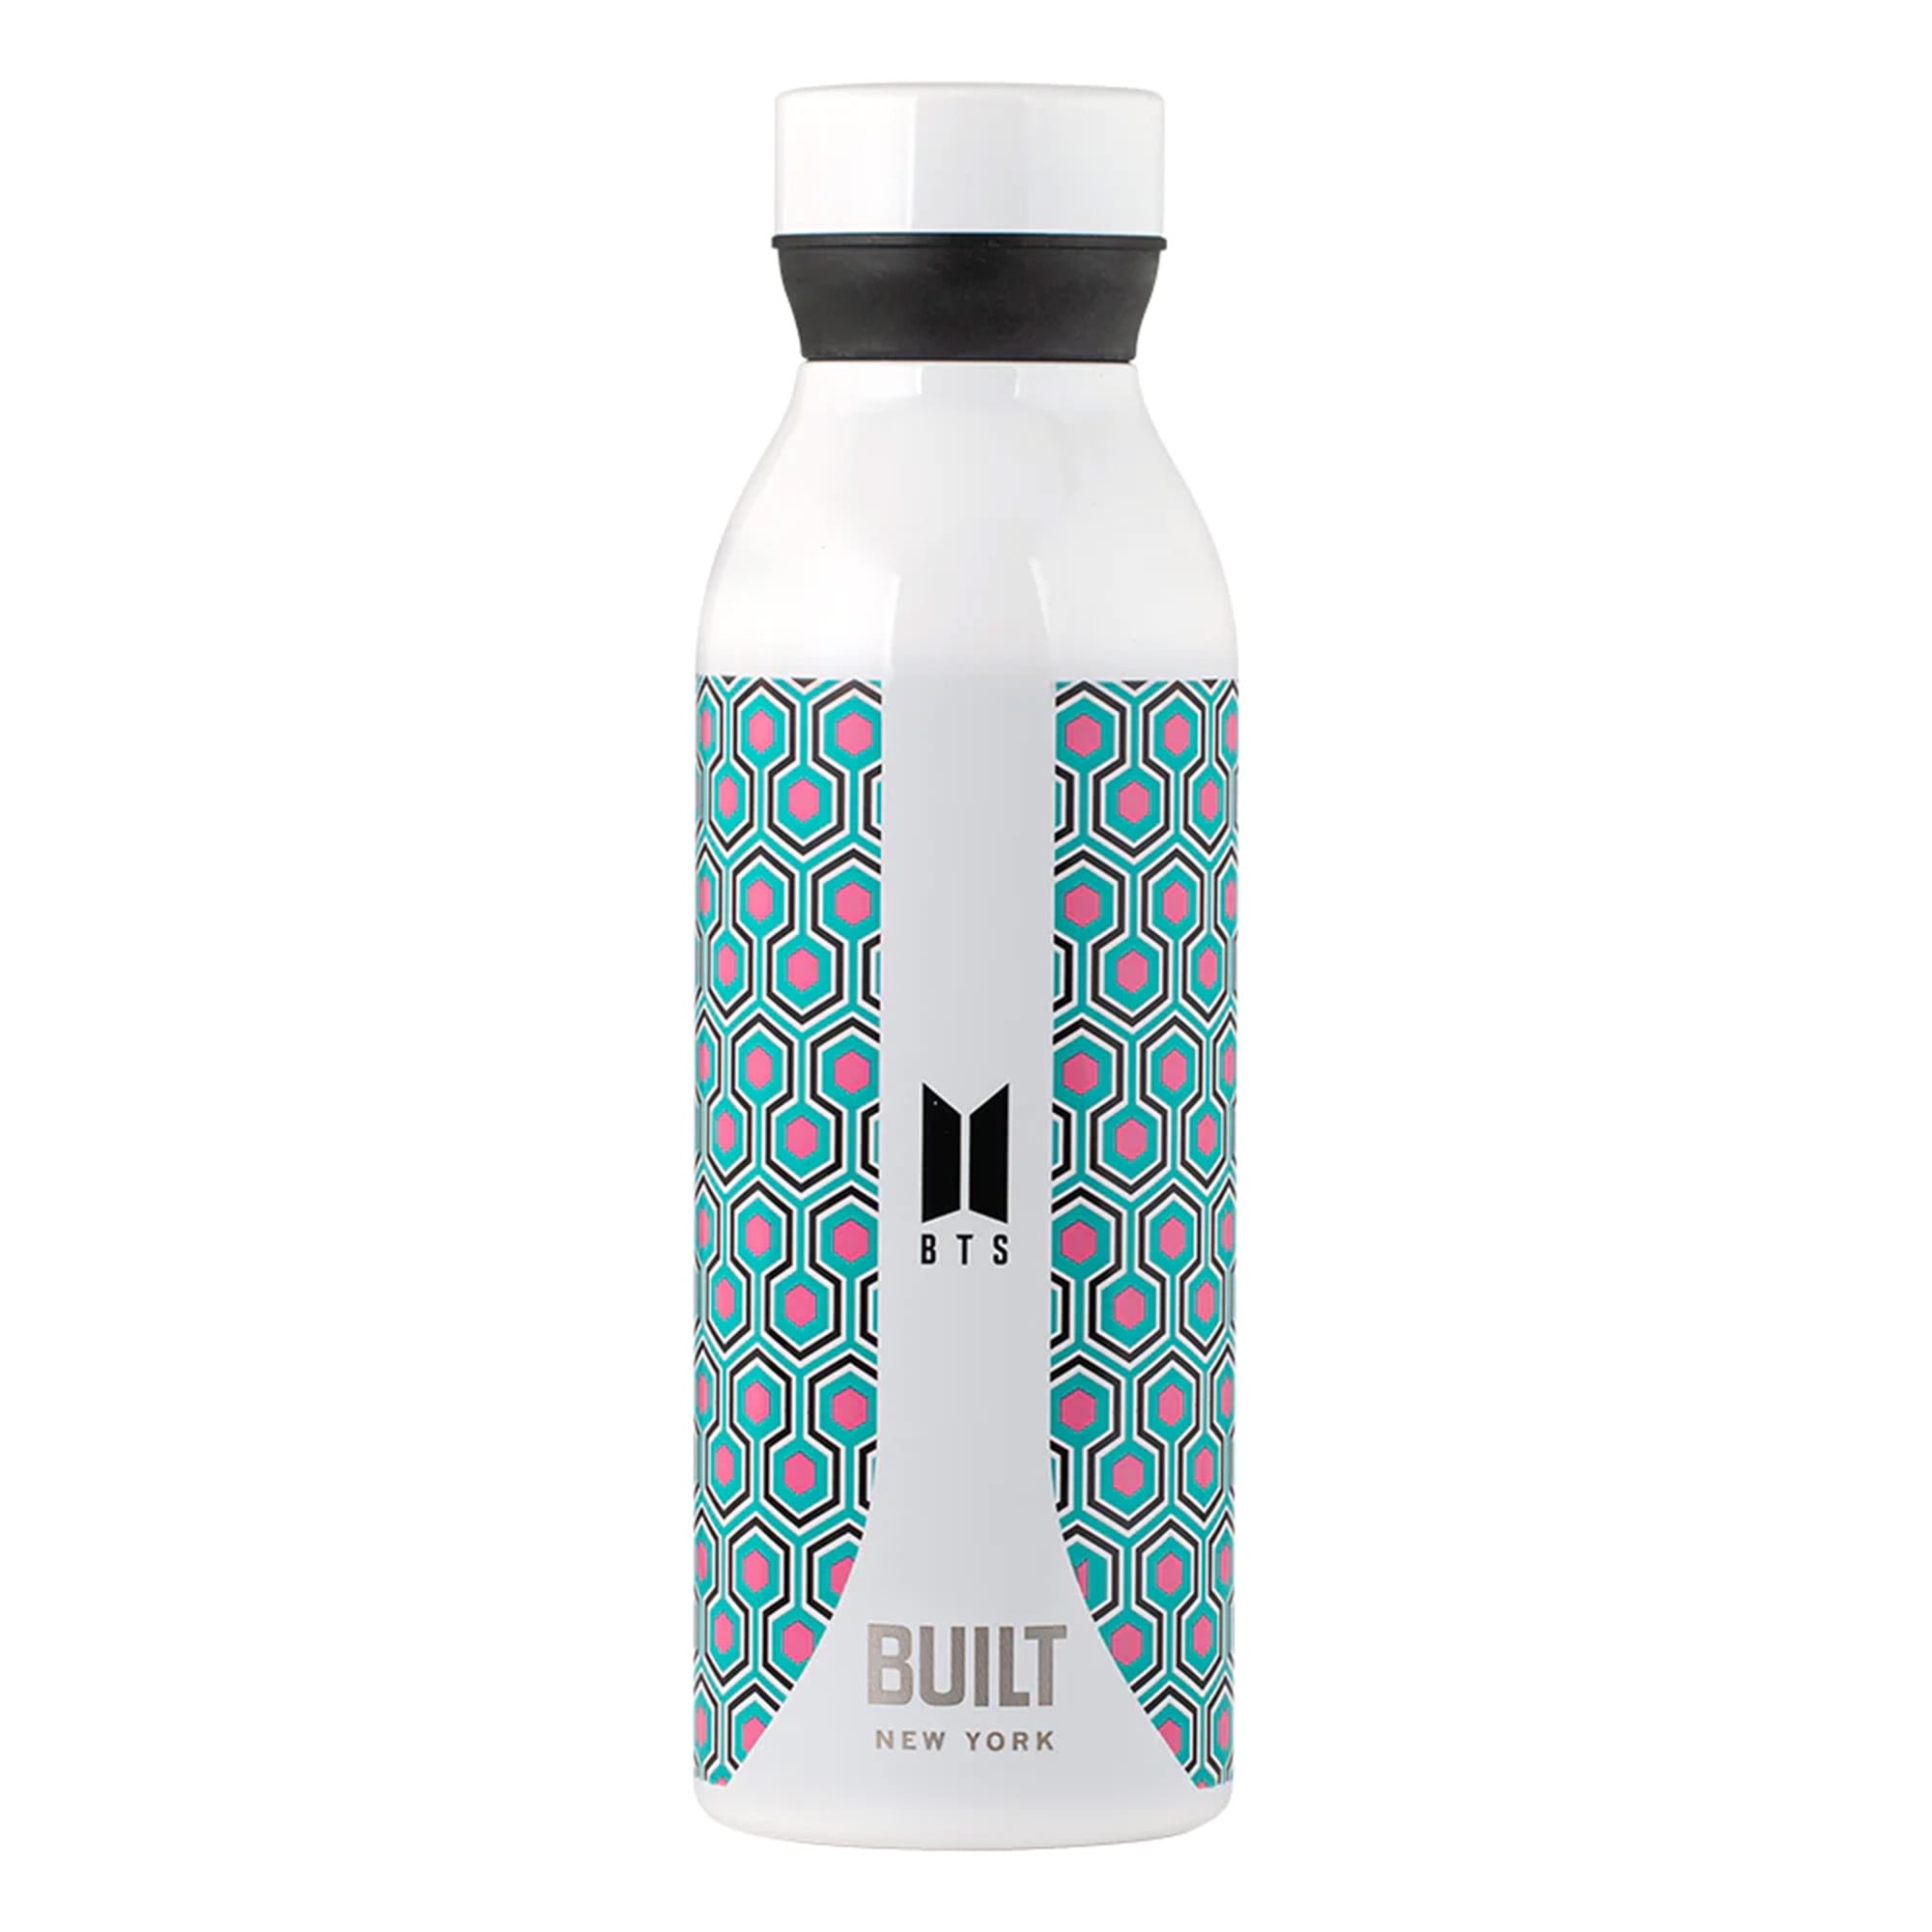 BTS Stainless Steel Leak Proof 18 oz. Thermos Water Bottle - Jungkook 